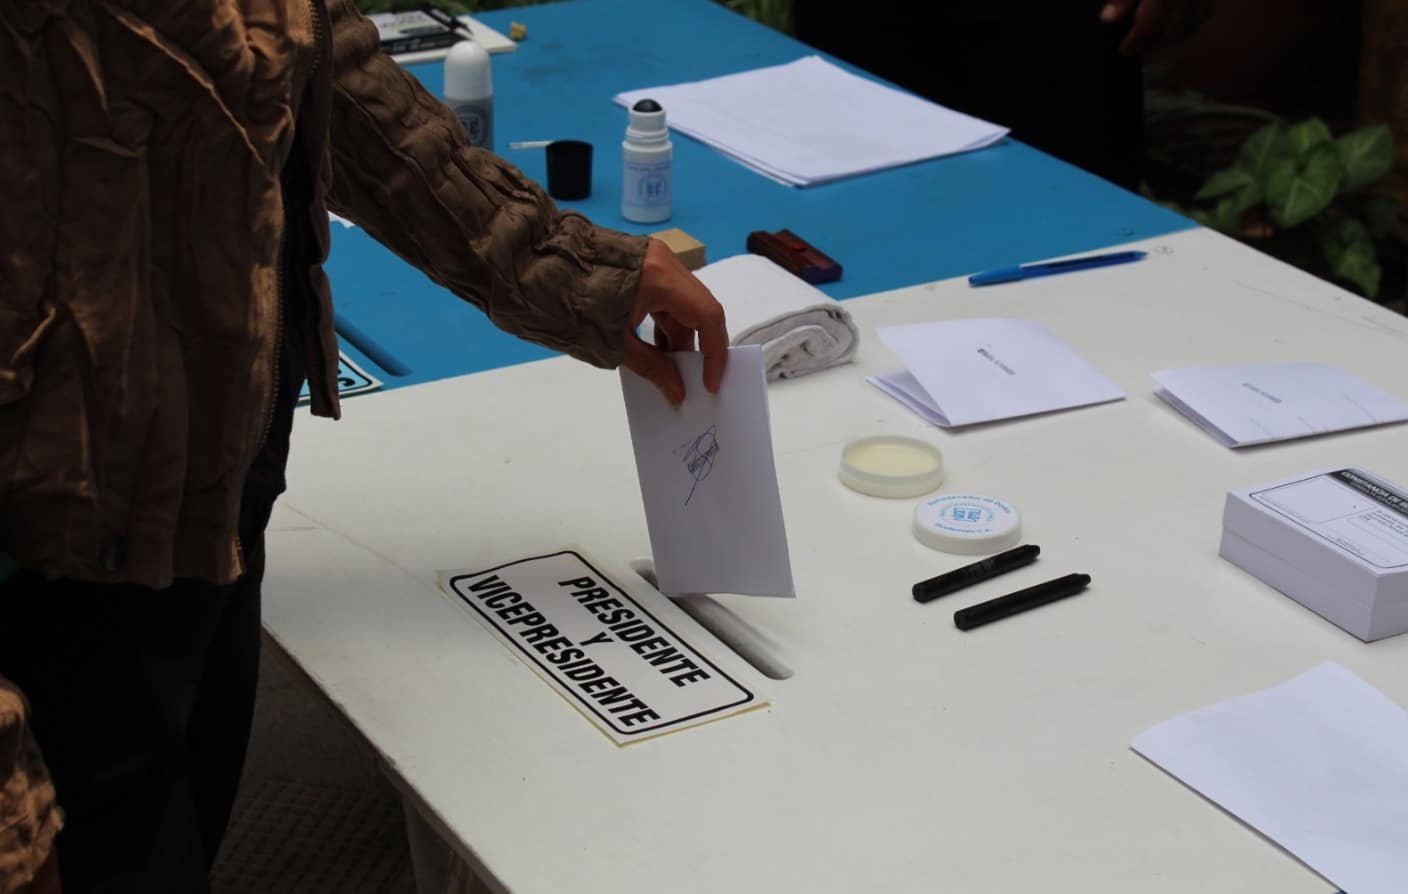 Almost 3,500 voting centers are ready for the upcoming presidential elections in Guatemala